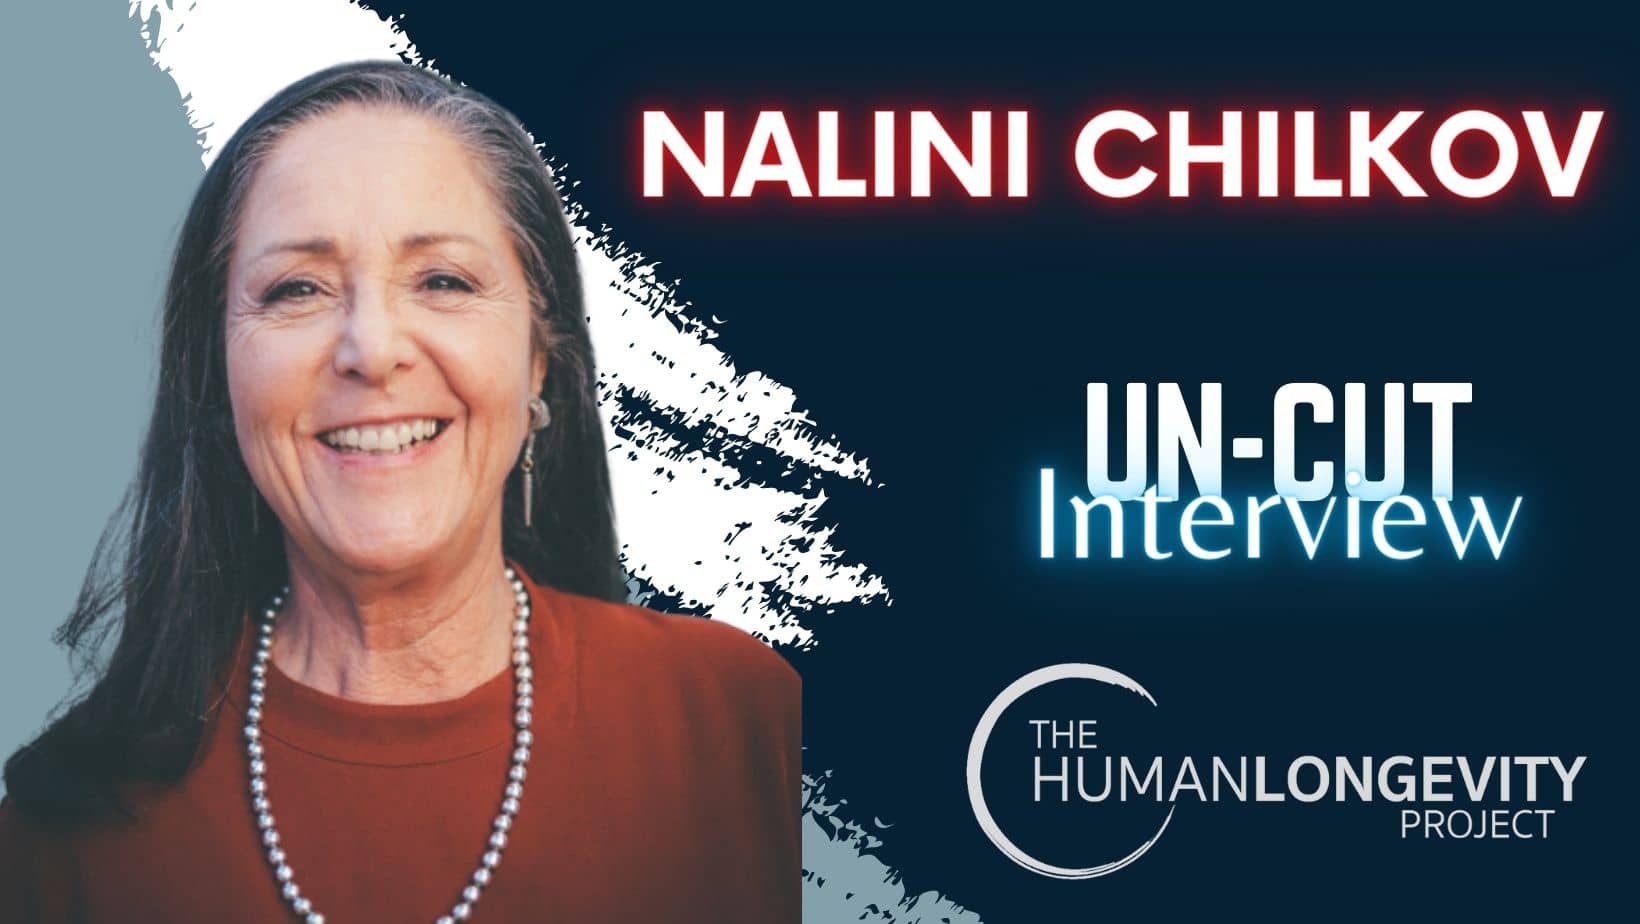 Human Longevity Project Uncut Interview With Dr. Nalini Chilkov